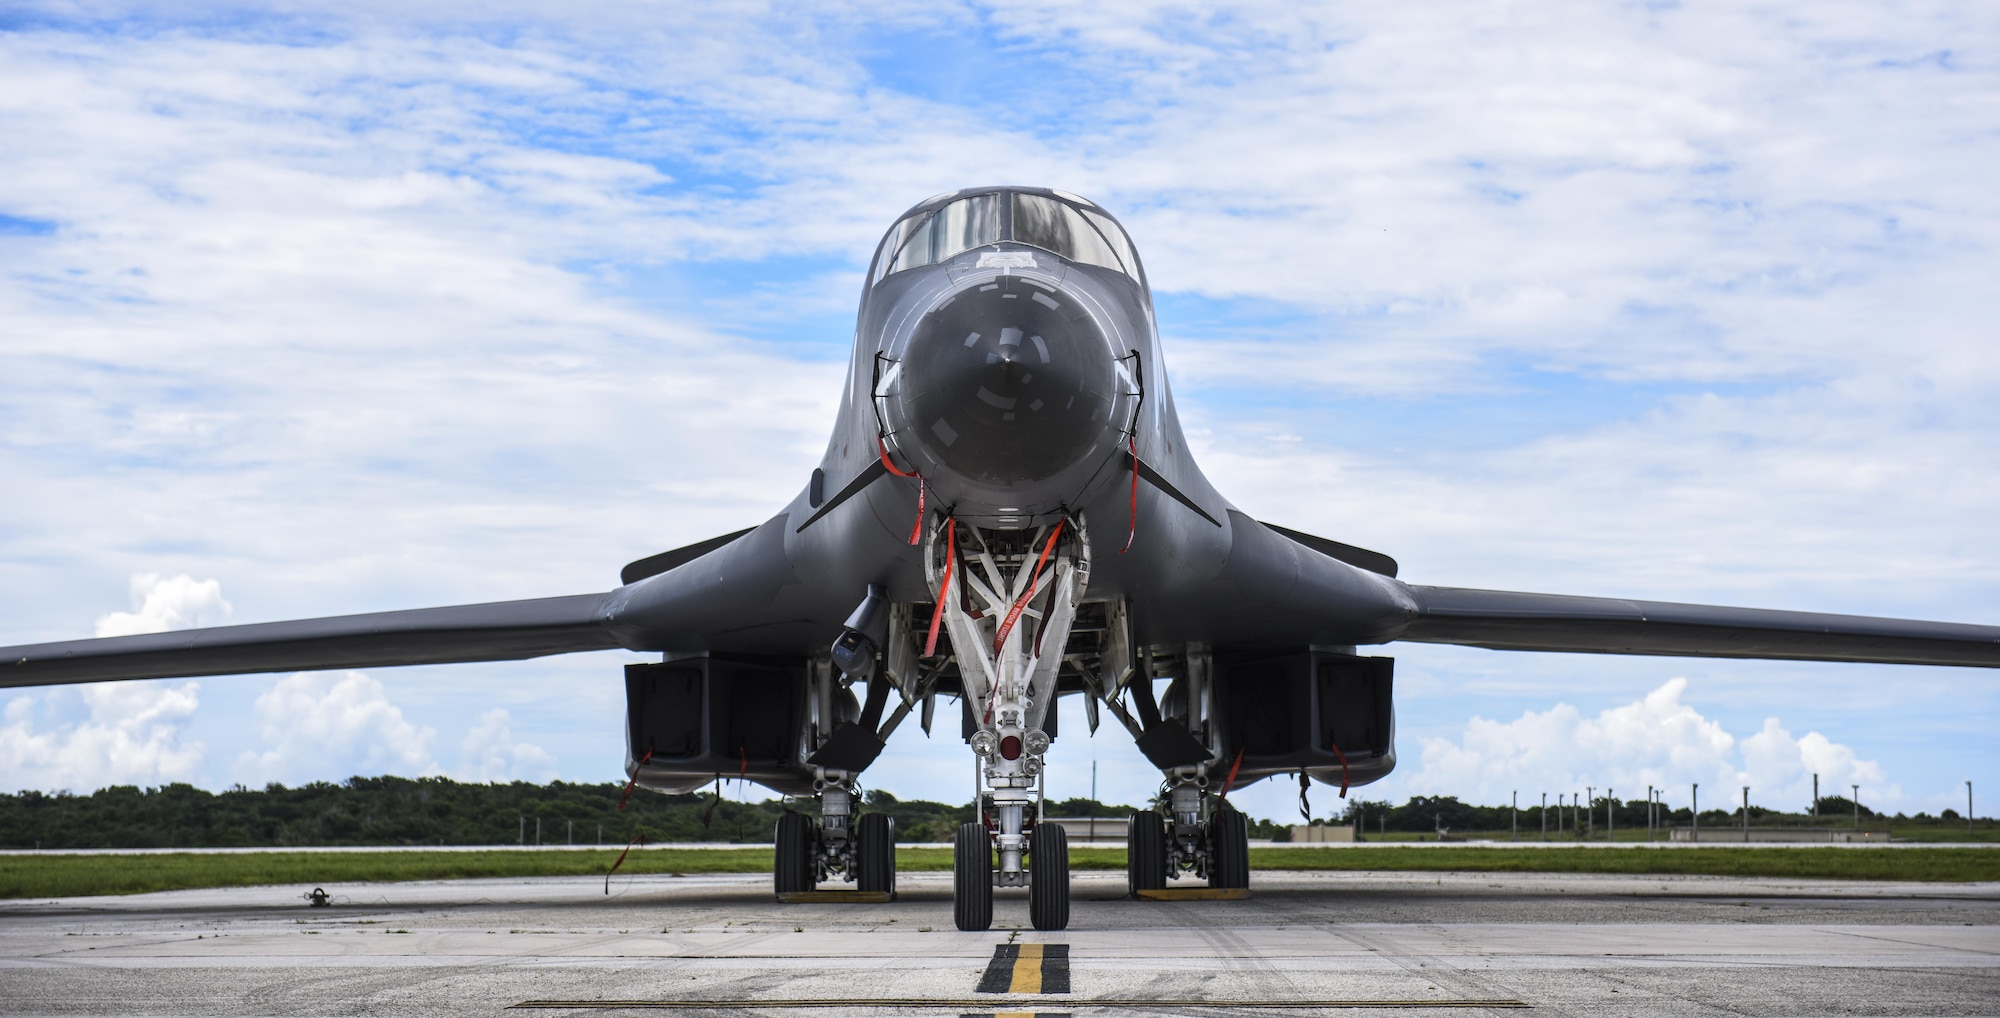 A B-1 Lancer sits on the flightline at Andersen Air Force Base, Guam, Aug.10, 2016. The B-1 Lancer, which arrived at Andersen Aug. 6, will replace the B-52 in support of the U.S. Pacific Command Continuous Bomber Presence mission. The CBP bomber swap between the B-1 and B-52 is occurring throughout the month of August as the B-1s return to support this mission for the first time since April 2006. The CBP mission is part of a long-standing history of maintaining a consistent bomber presence in the Indo-Asia-Pacific in order to maintain regional stability, and provide assurance to our allies and partners in the region. (U.S. Air Force photo by Tech. Sgt. Richard Ebensberger)